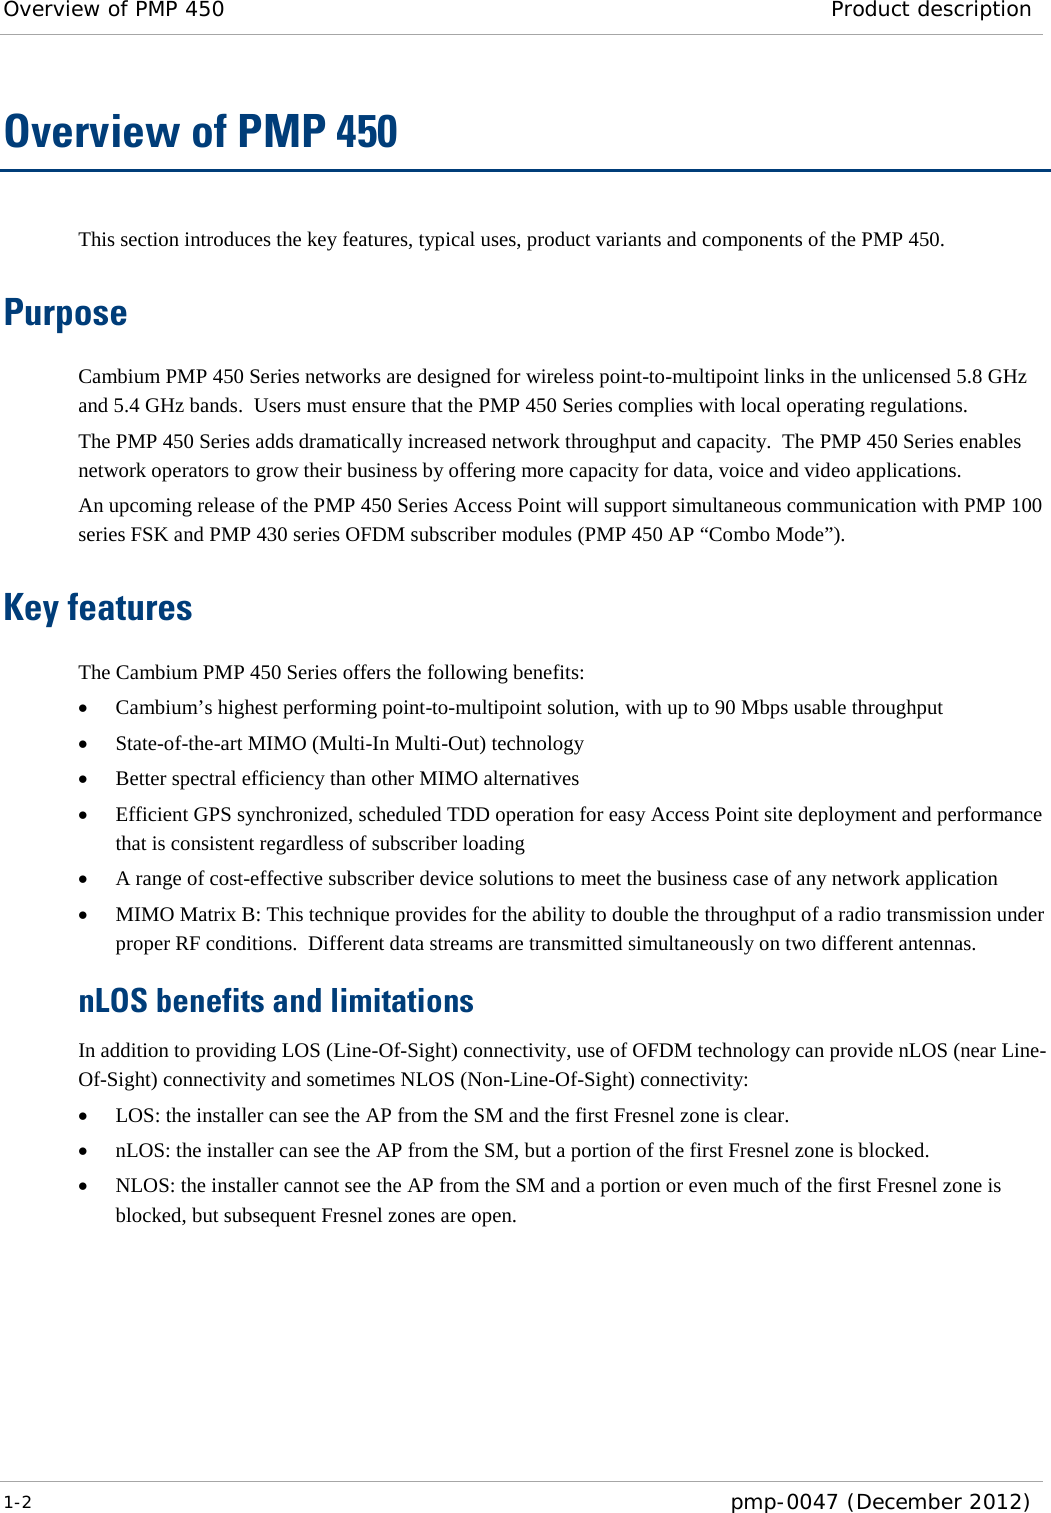 Overview of PMP 450 Product description  1-2  pmp-0047 (December 2012)  Overview of PMP 450 This section introduces the key features, typical uses, product variants and components of the PMP 450. Purpose Cambium PMP 450 Series networks are designed for wireless point-to-multipoint links in the unlicensed 5.8 GHz and 5.4 GHz bands.  Users must ensure that the PMP 450 Series complies with local operating regulations. The PMP 450 Series adds dramatically increased network throughput and capacity.  The PMP 450 Series enables network operators to grow their business by offering more capacity for data, voice and video applications. An upcoming release of the PMP 450 Series Access Point will support simultaneous communication with PMP 100 series FSK and PMP 430 series OFDM subscriber modules (PMP 450 AP “Combo Mode”). Key features The Cambium PMP 450 Series offers the following benefits: • Cambium’s highest performing point-to-multipoint solution, with up to 90 Mbps usable throughput • State-of-the-art MIMO (Multi-In Multi-Out) technology  • Better spectral efficiency than other MIMO alternatives • Efficient GPS synchronized, scheduled TDD operation for easy Access Point site deployment and performance that is consistent regardless of subscriber loading • A range of cost-effective subscriber device solutions to meet the business case of any network application • MIMO Matrix B: This technique provides for the ability to double the throughput of a radio transmission under proper RF conditions.  Different data streams are transmitted simultaneously on two different antennas. nLOS benefits and limitations In addition to providing LOS (Line-Of-Sight) connectivity, use of OFDM technology can provide nLOS (near Line-Of-Sight) connectivity and sometimes NLOS (Non-Line-Of-Sight) connectivity: • LOS: the installer can see the AP from the SM and the first Fresnel zone is clear. • nLOS: the installer can see the AP from the SM, but a portion of the first Fresnel zone is blocked. • NLOS: the installer cannot see the AP from the SM and a portion or even much of the first Fresnel zone is blocked, but subsequent Fresnel zones are open. 